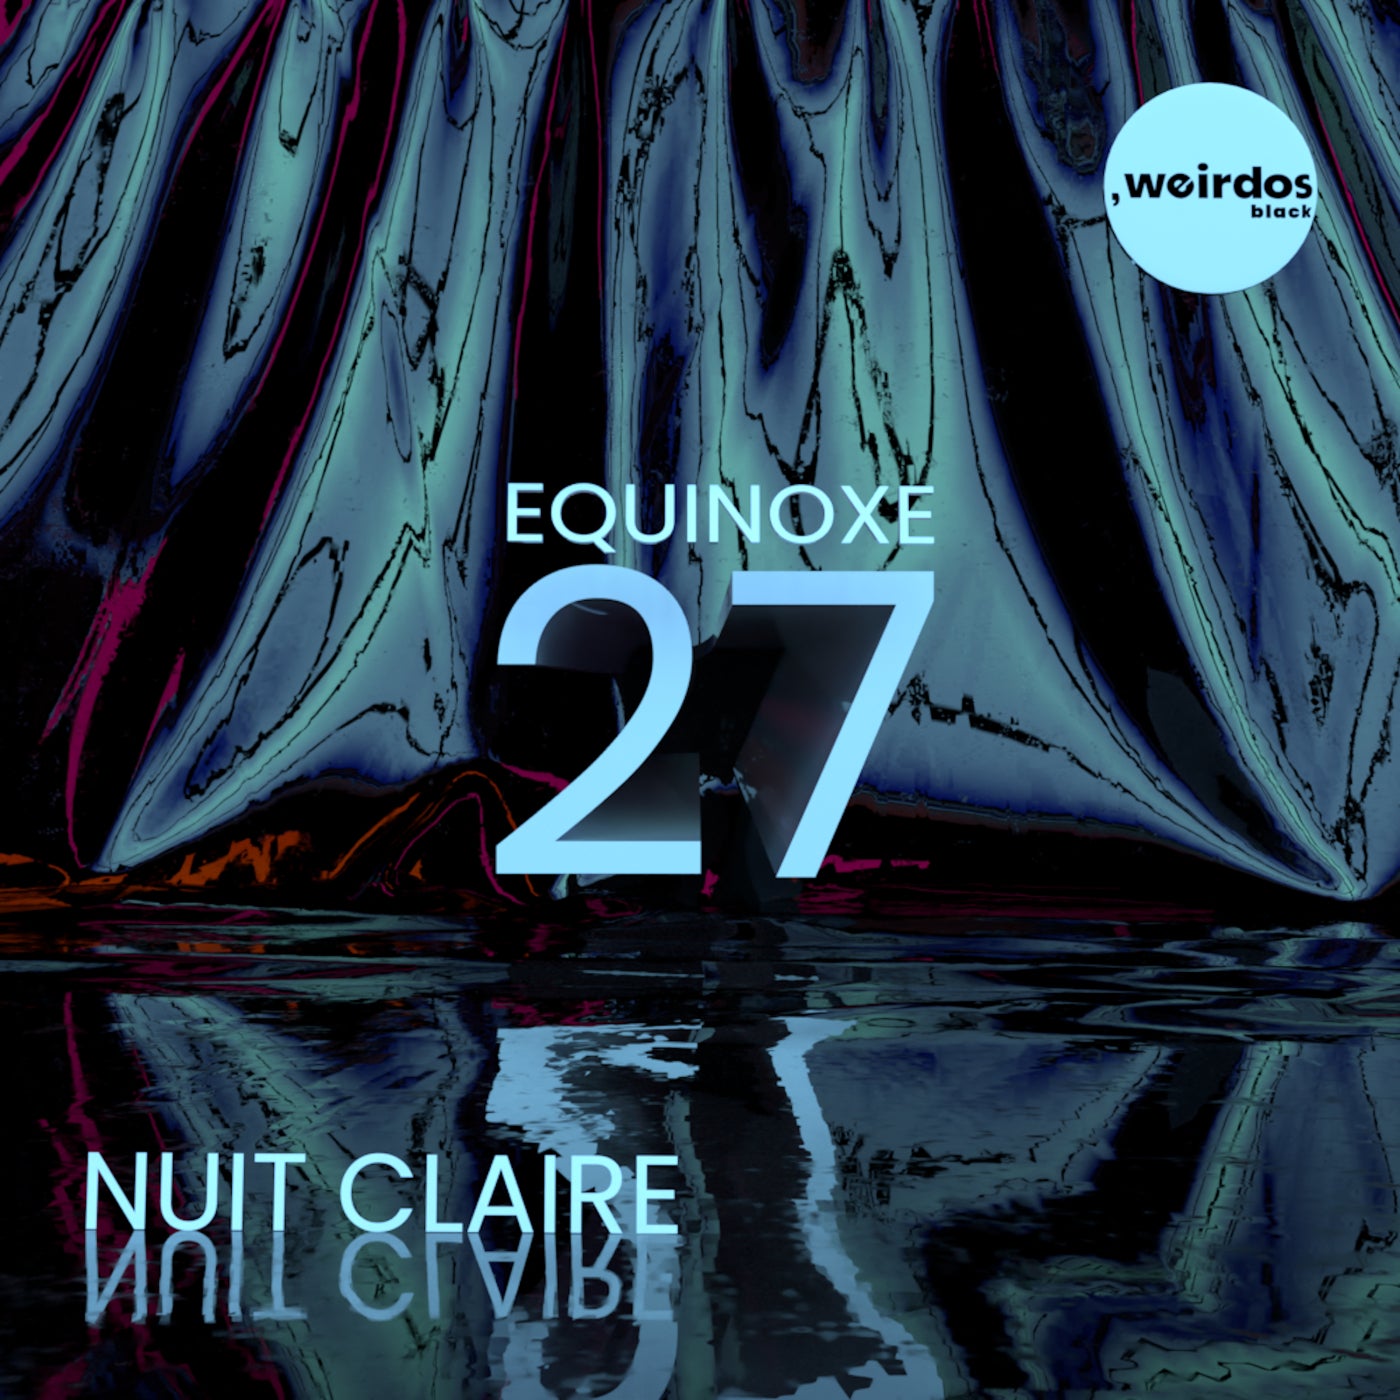 Nuit Claire – Equinoxe 27 [WRDB00]